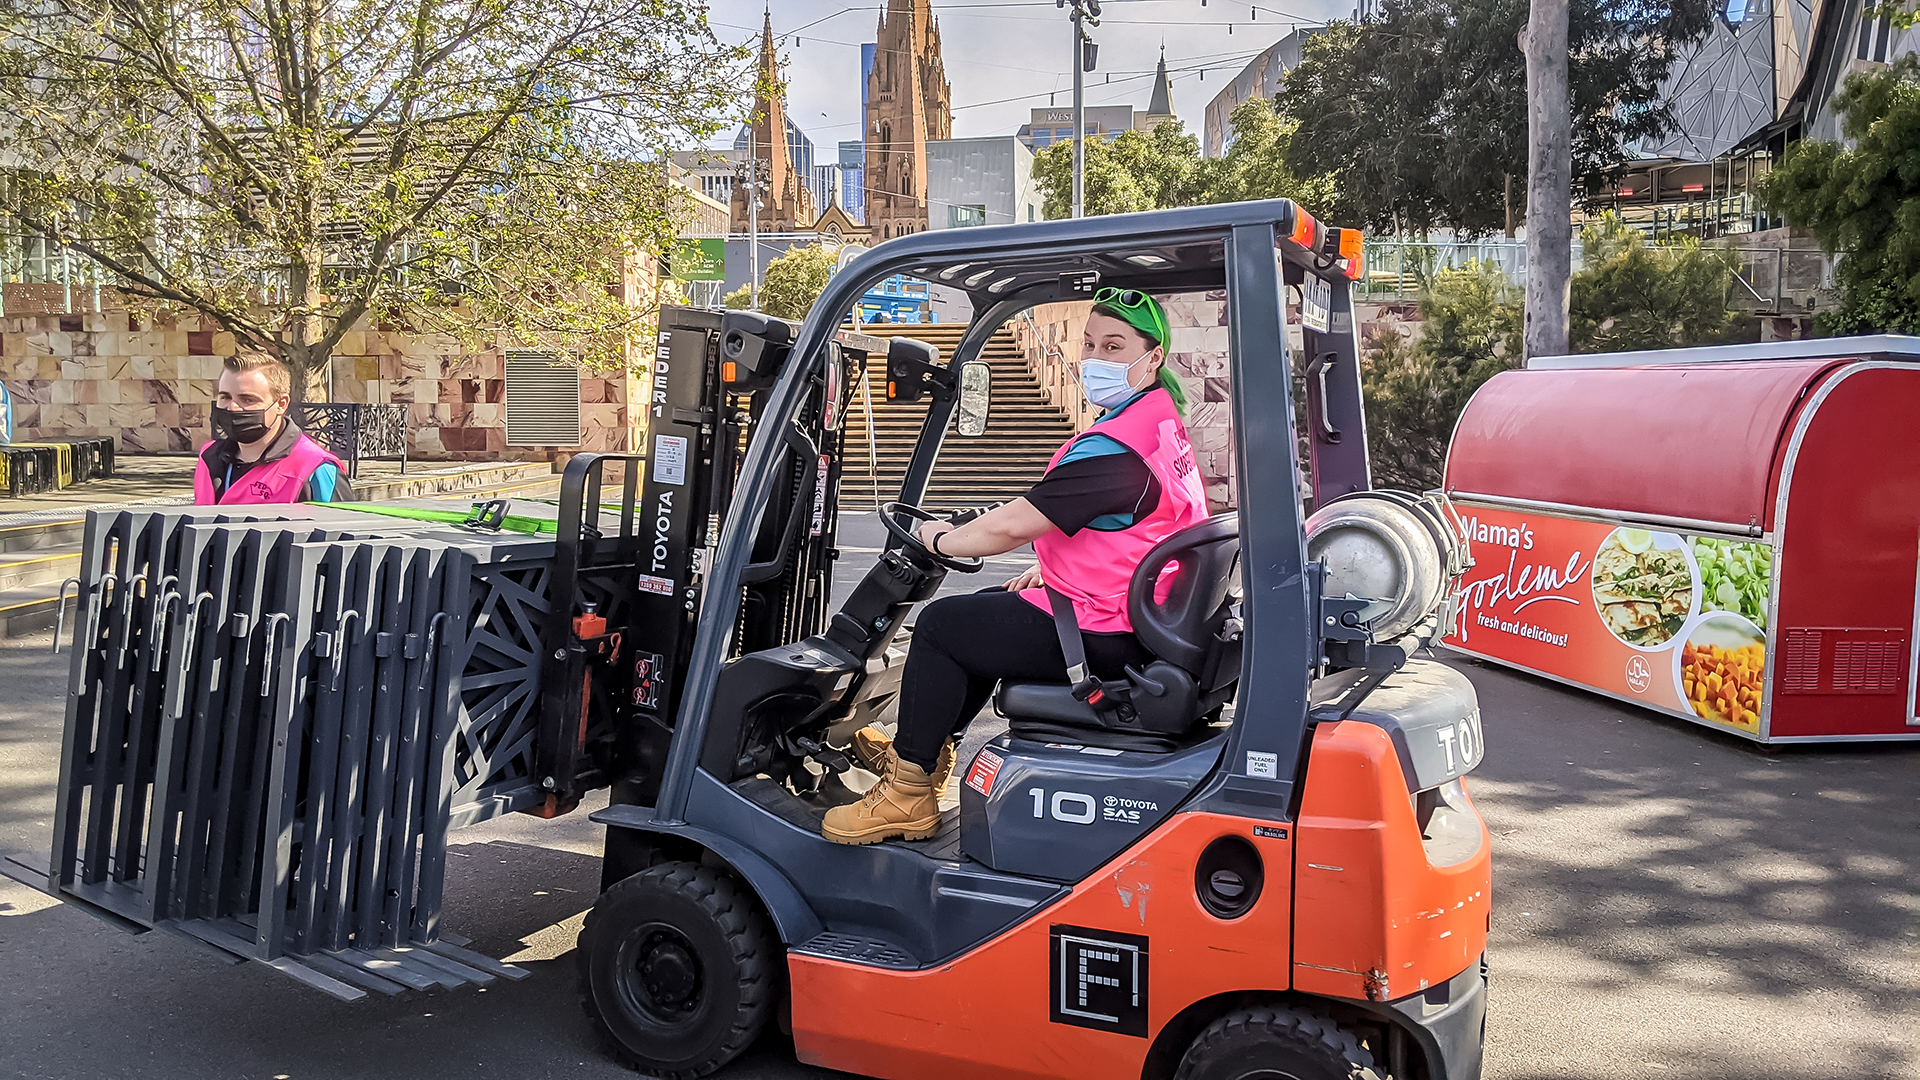 Ellora is sitting in a forklift that is facing left, looking at the camera in a fluoro pink vest